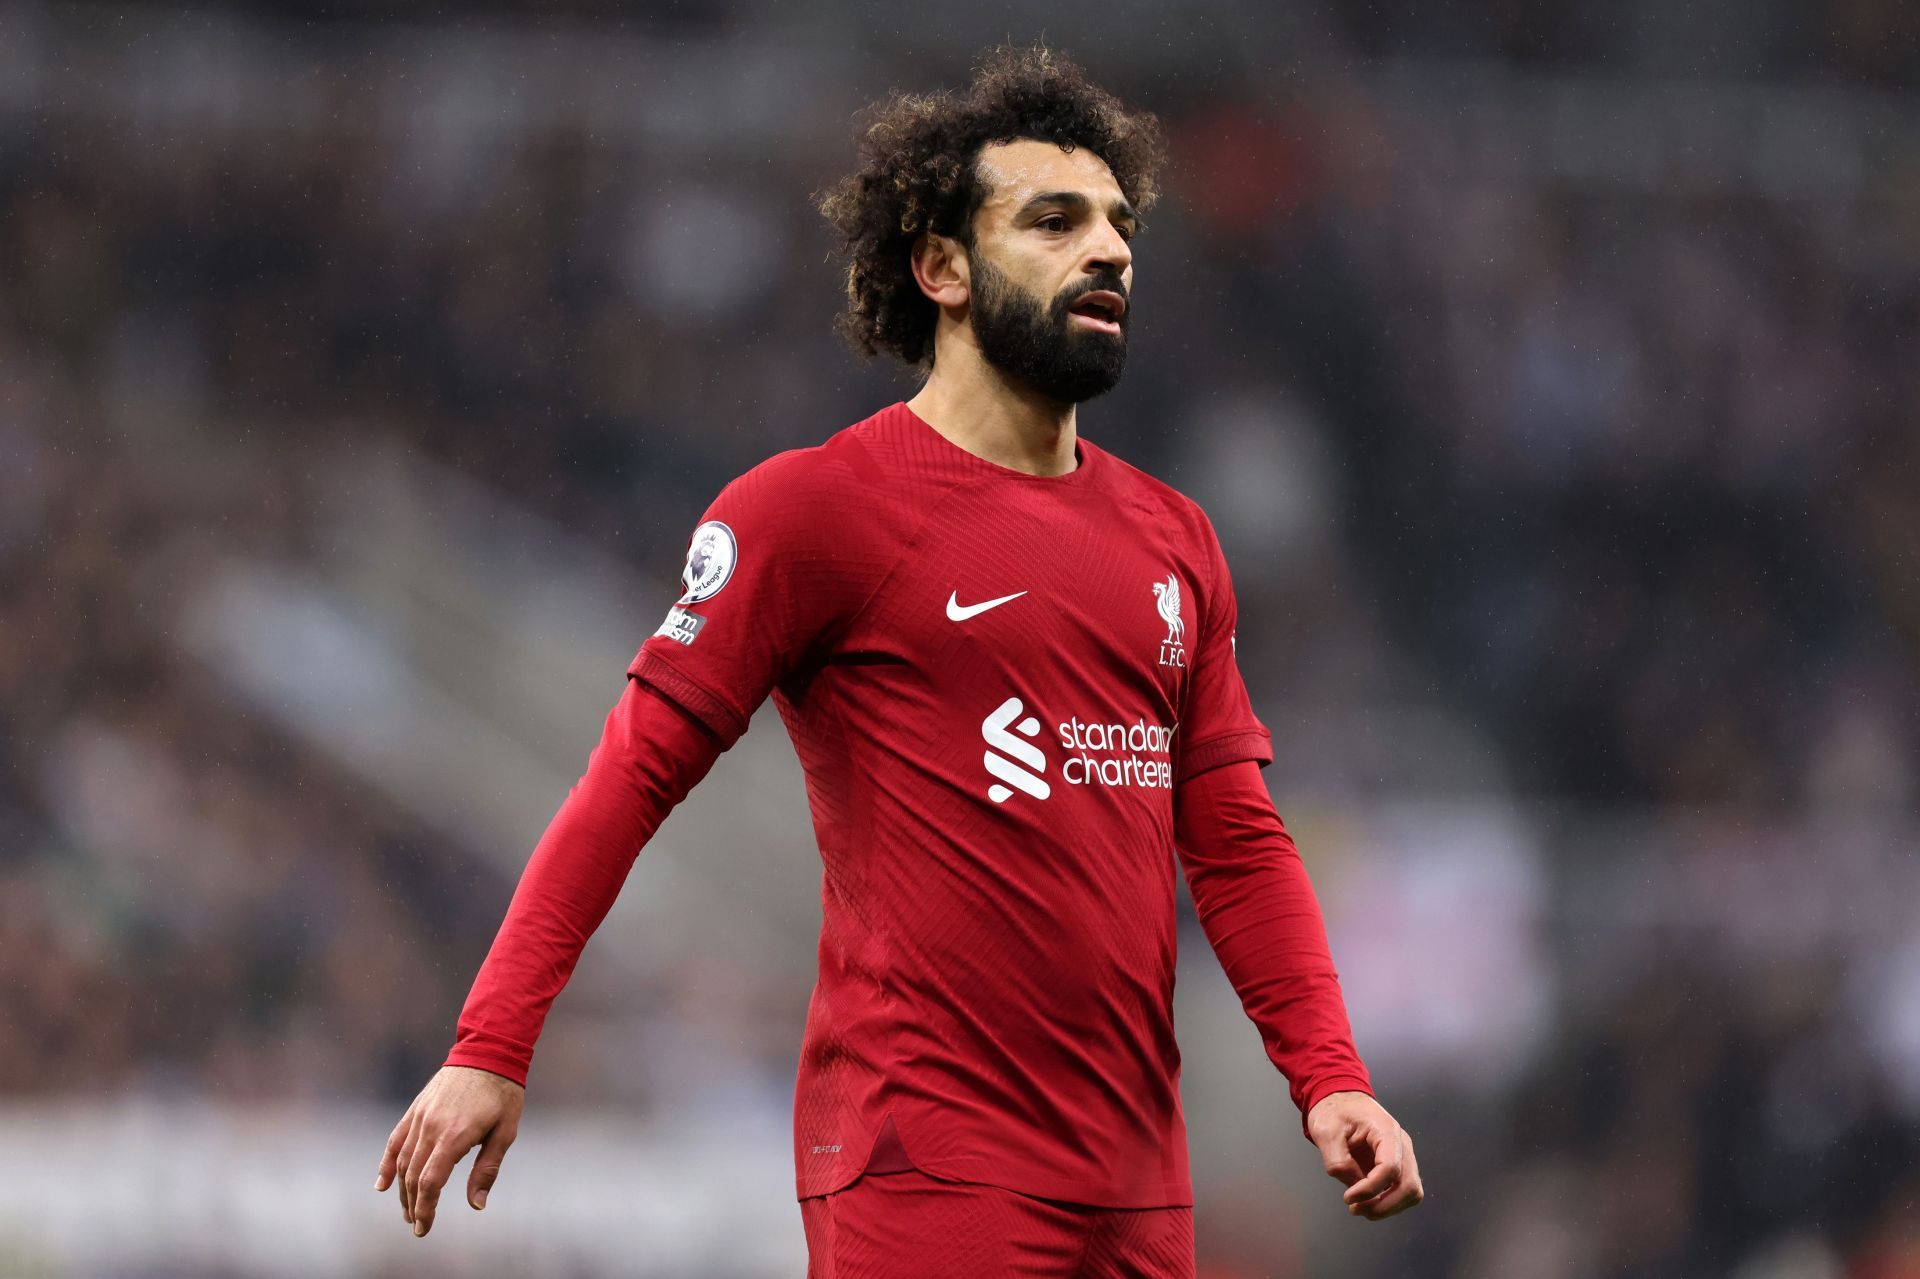 Salah is prepared for Manchester United clash.